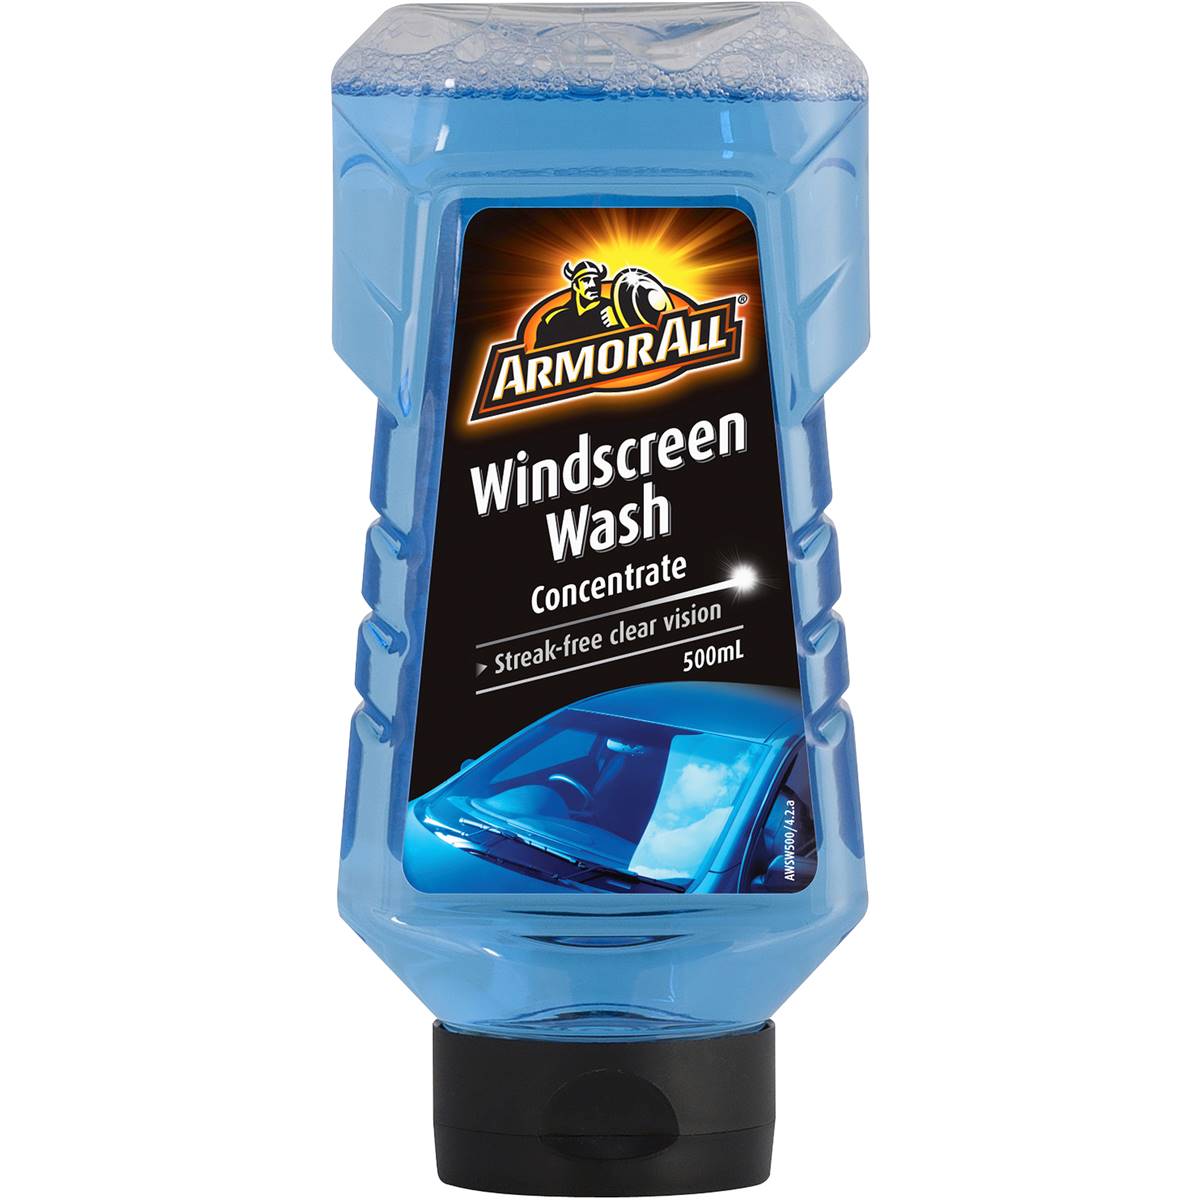 Armor All Windscreen Wash Concentrate 500ml AWSW500/4BAU - Double Bay Hardware